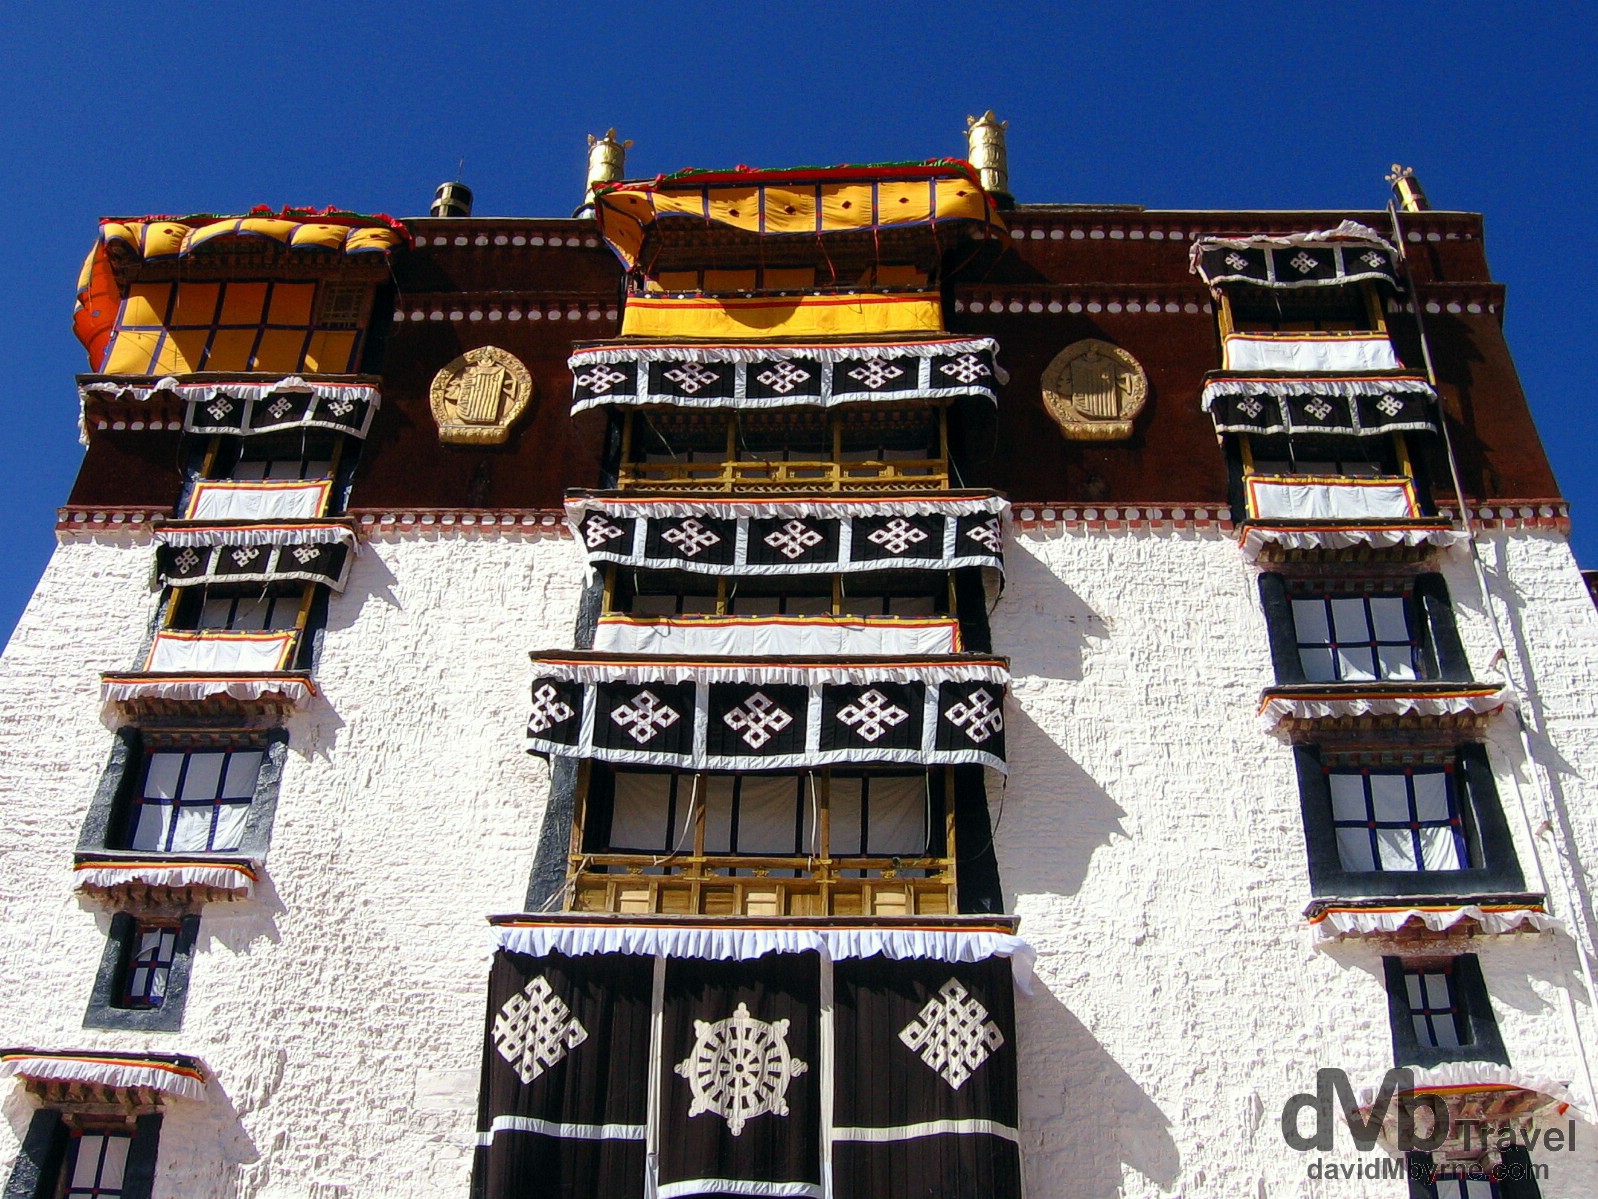 Architecture in Lhasa, Tibet. February 28th, 2008.